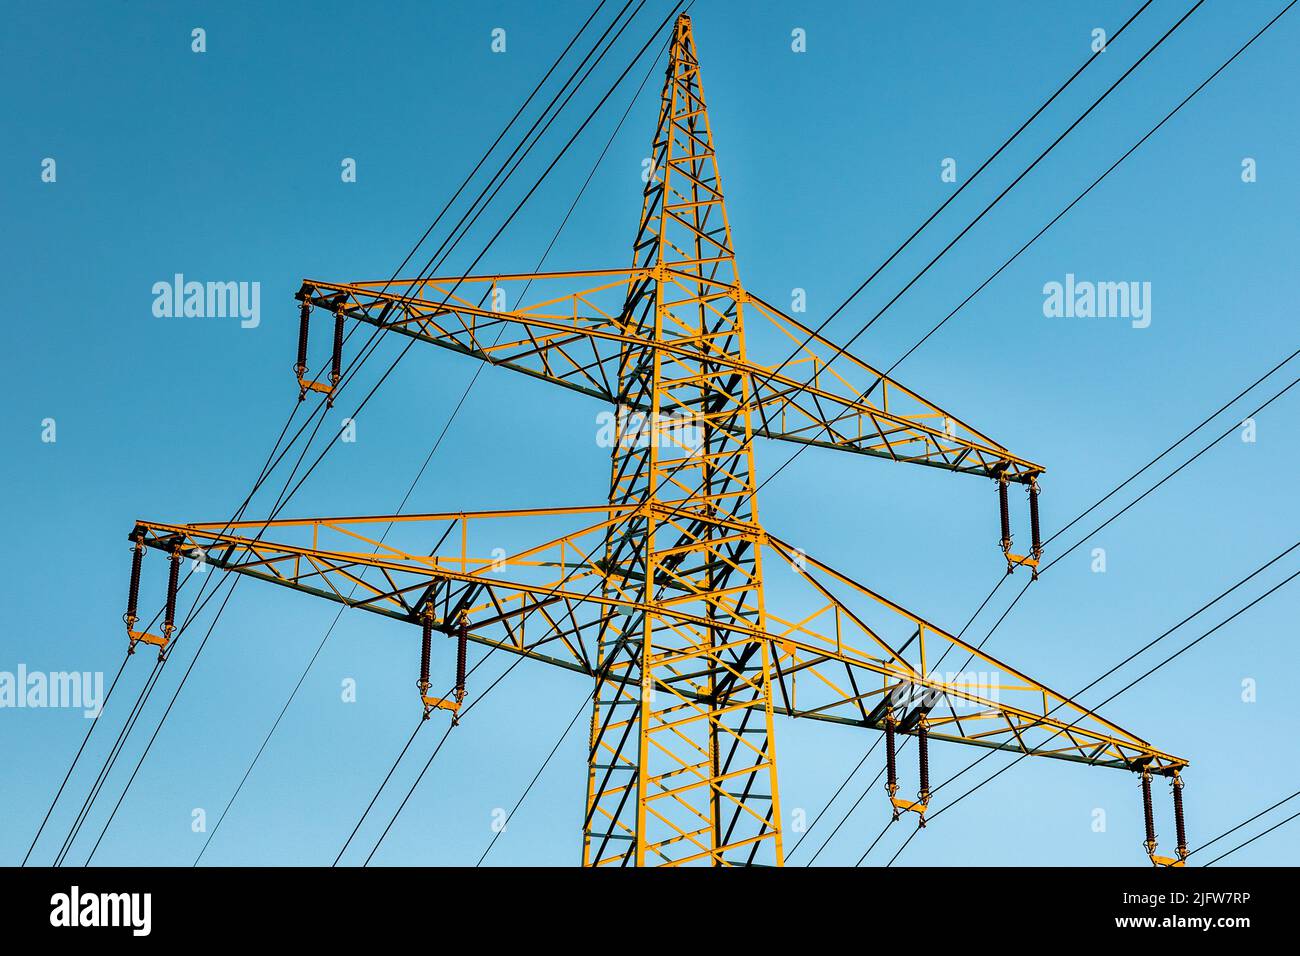 High voltage power line tower on a panorama of blue sky, taken at sunset. Stock Photo